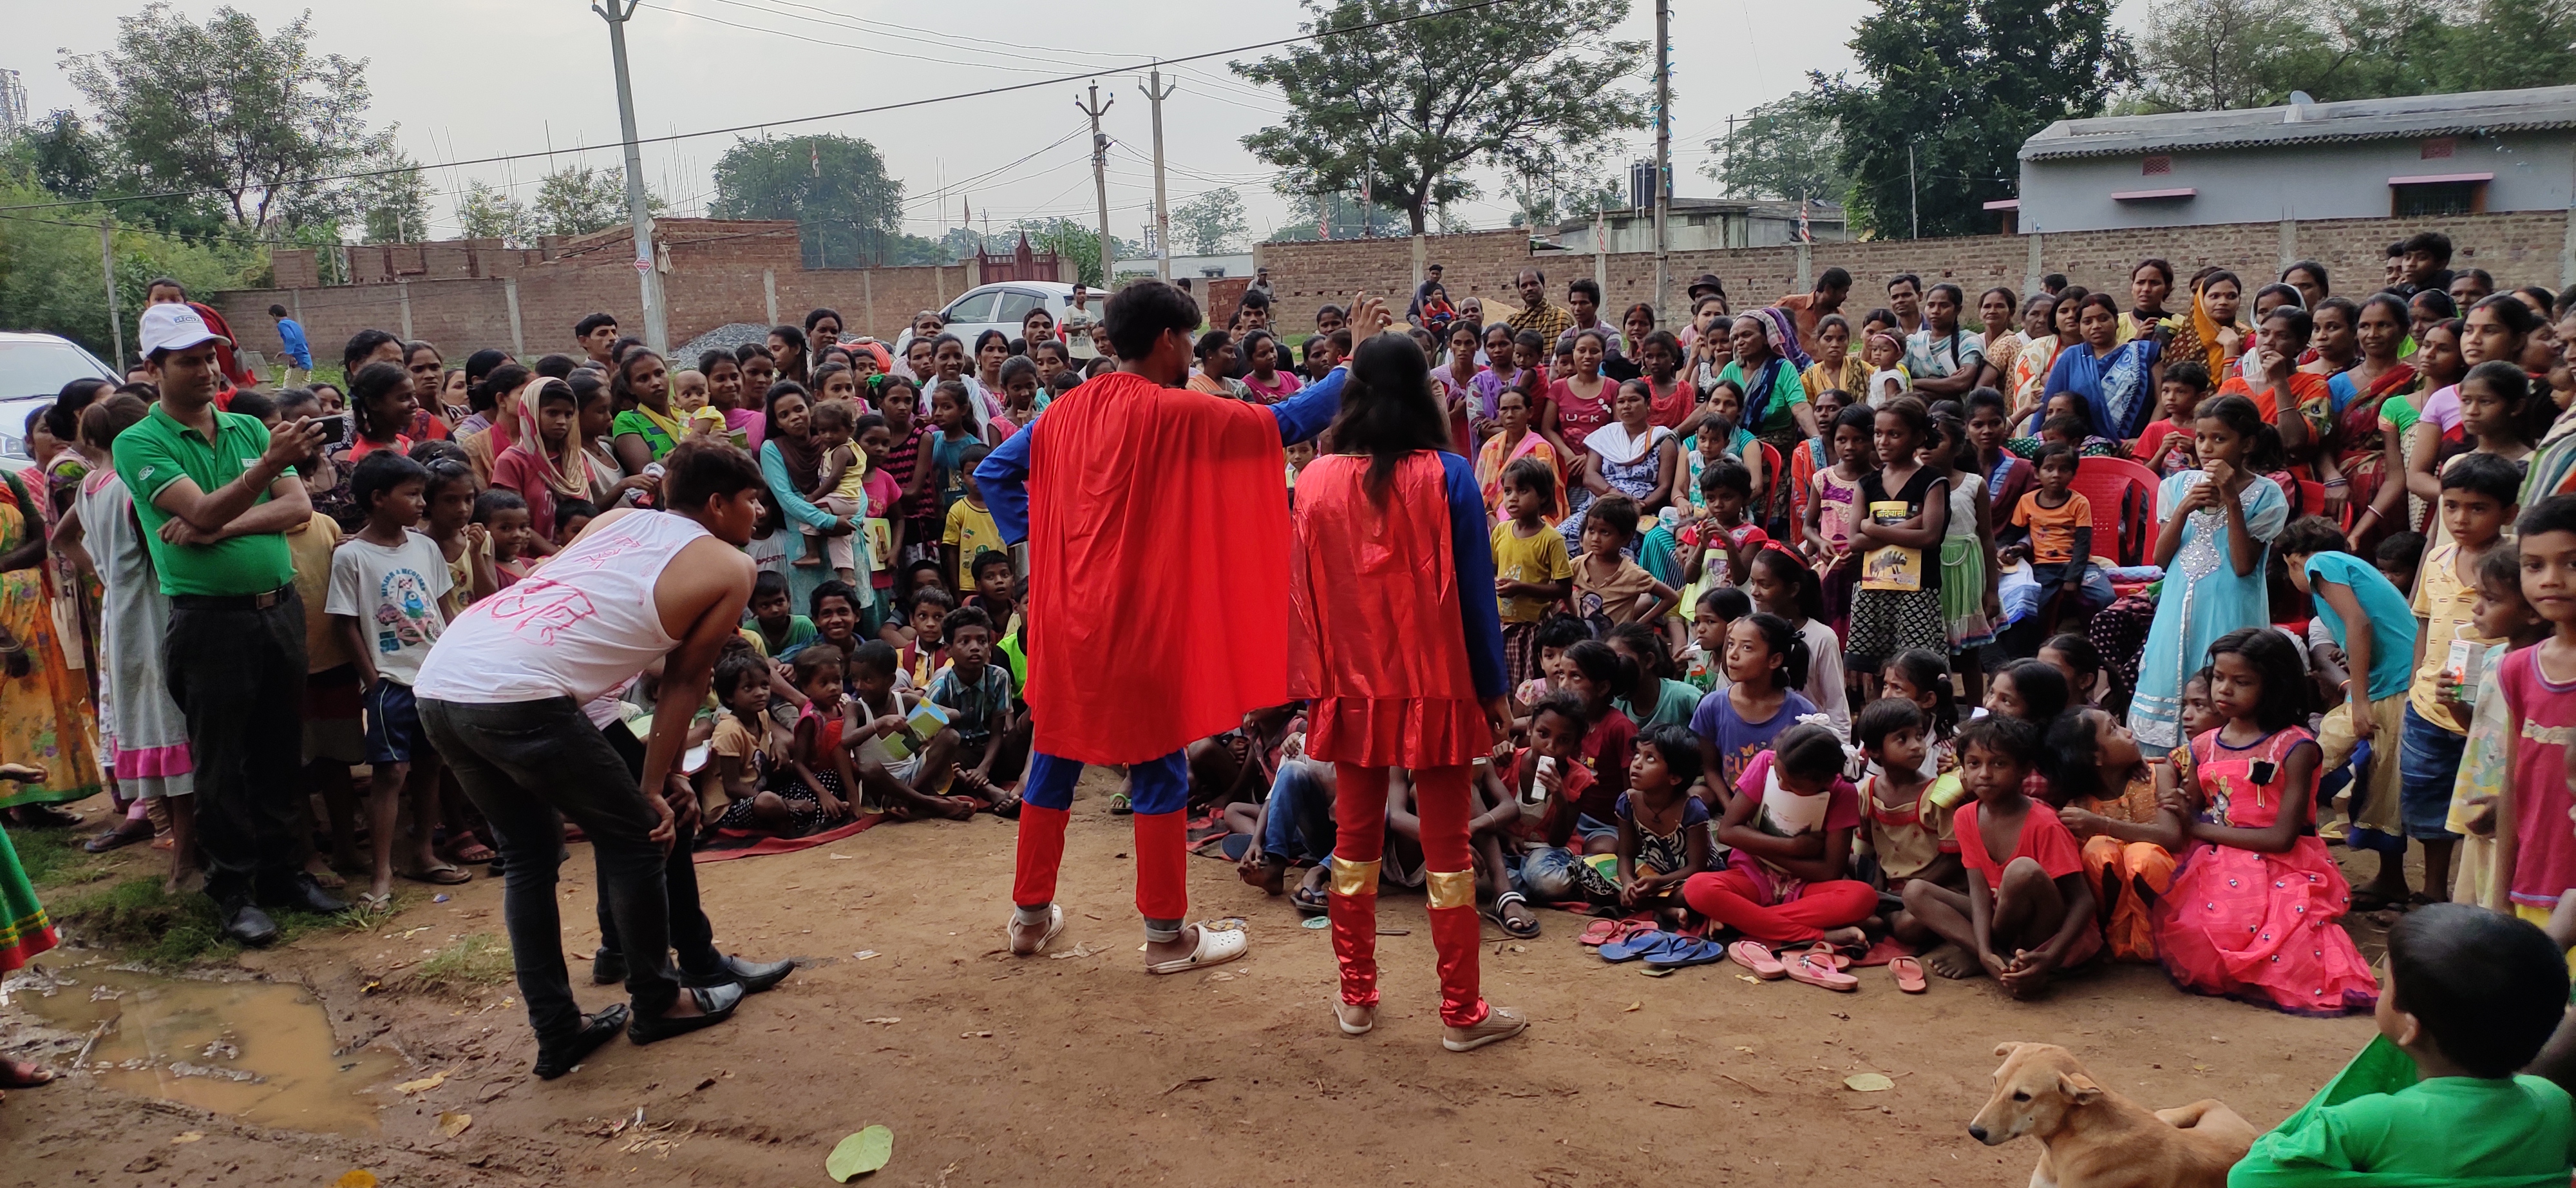 two people dressed as superman and superwoman are talking to a crowed of children and you adults